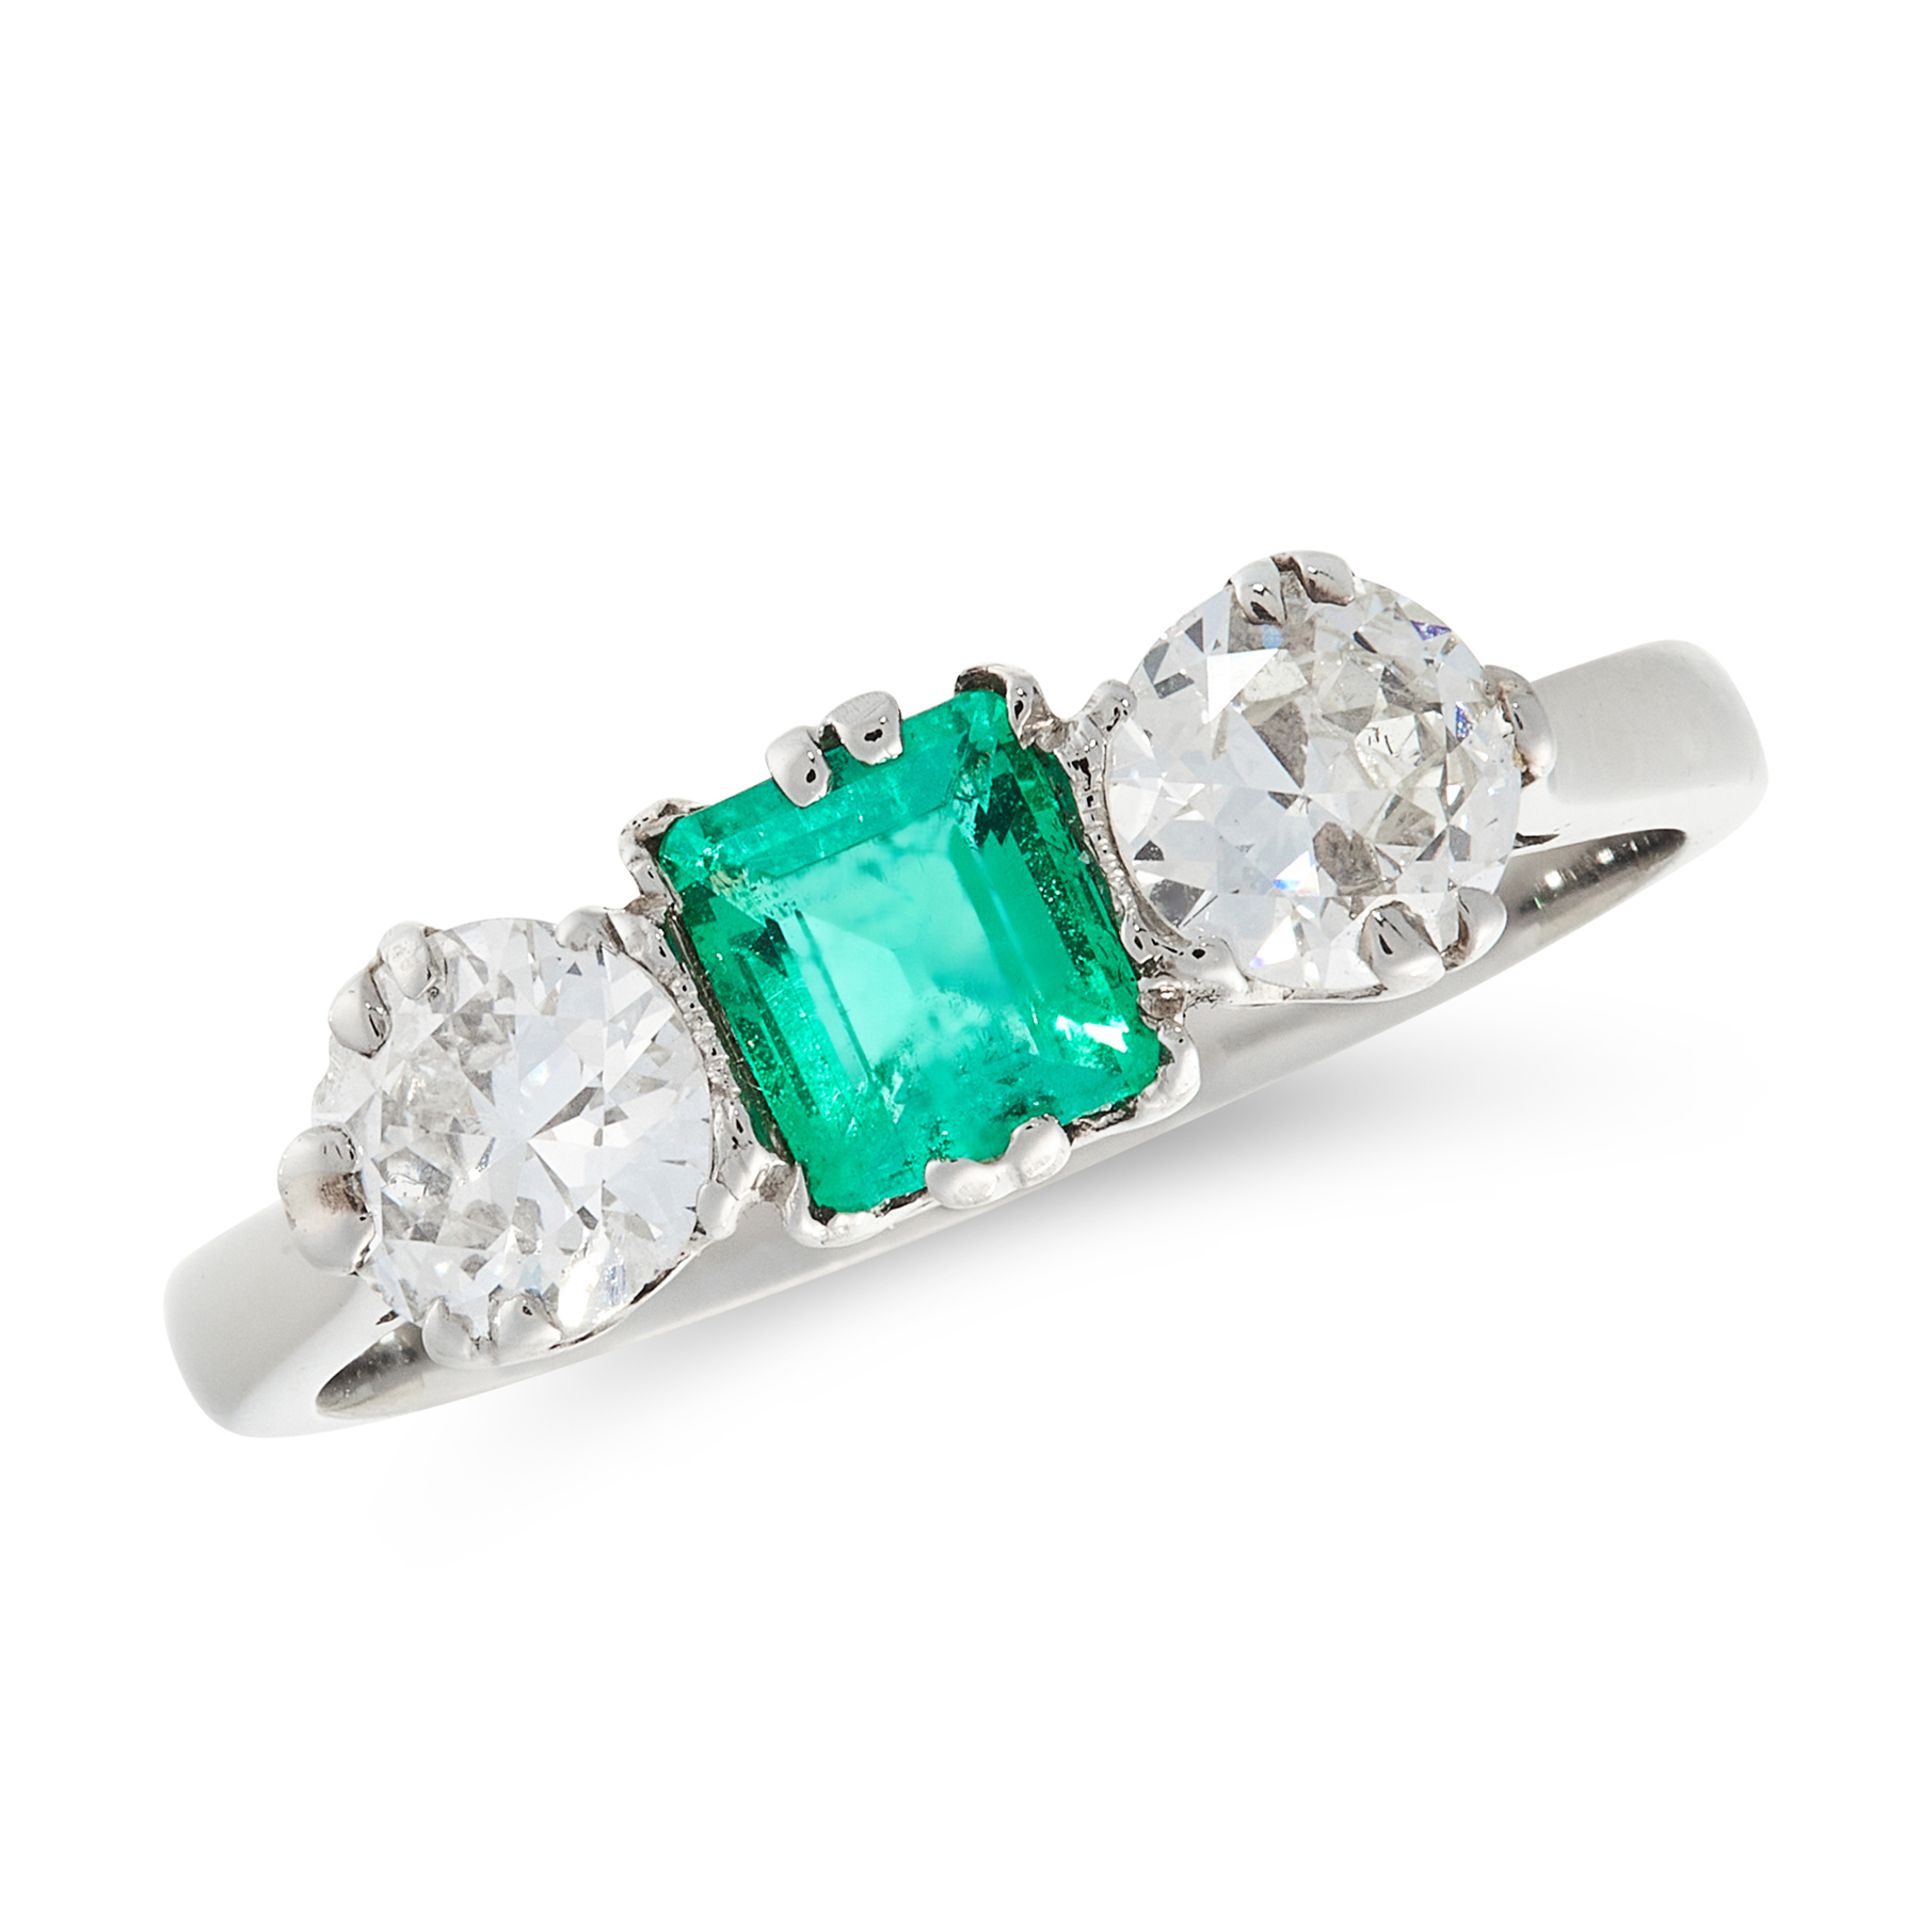 A COLOMBIAN EMERALD AND DIAMOND RING set with a step cut emerald between two round cut diamonds, the